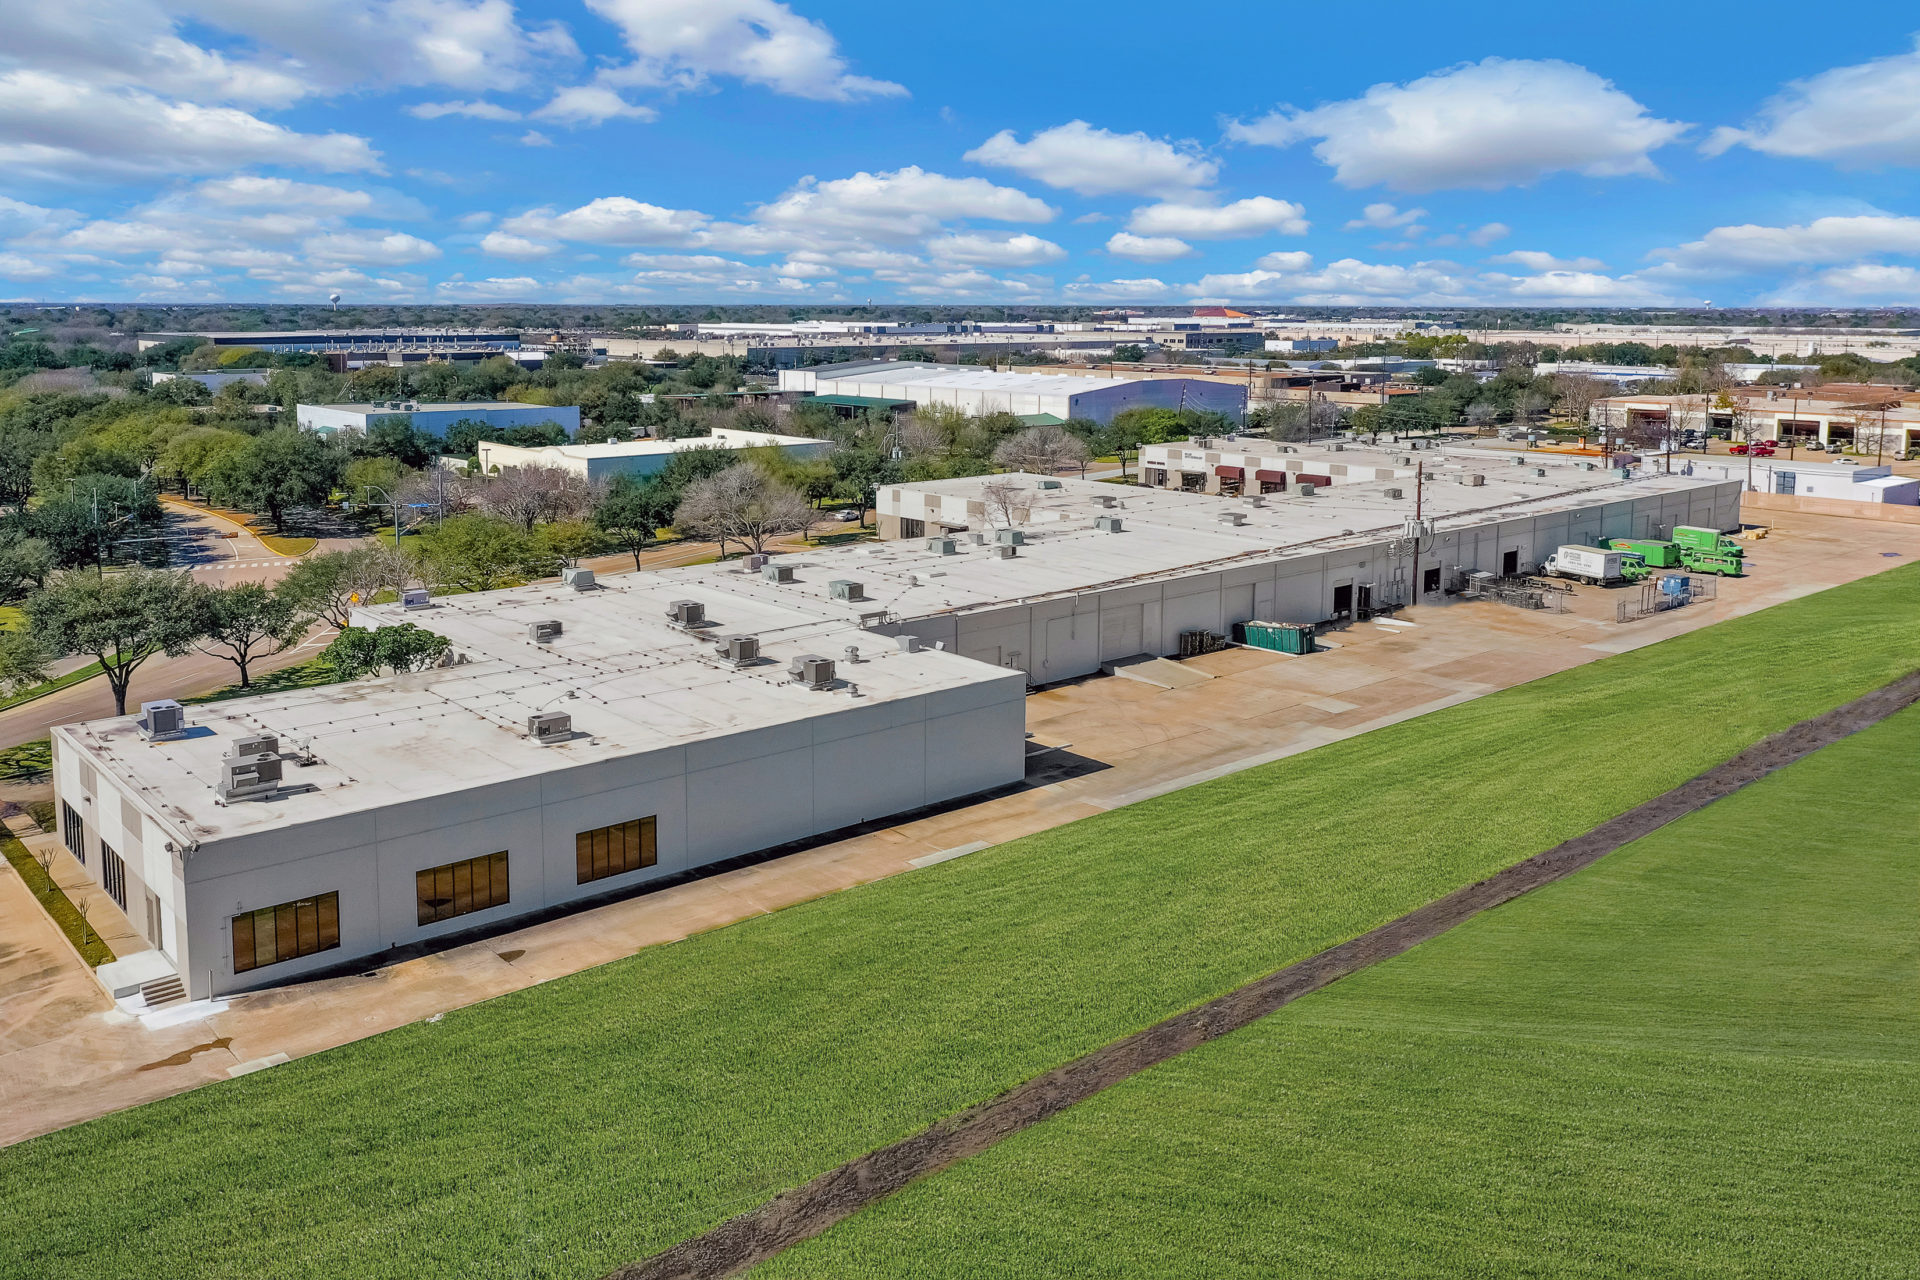 Aerial view of the backside of 700 Industrial Boulevard showing multiple loading docks and space for truck parking